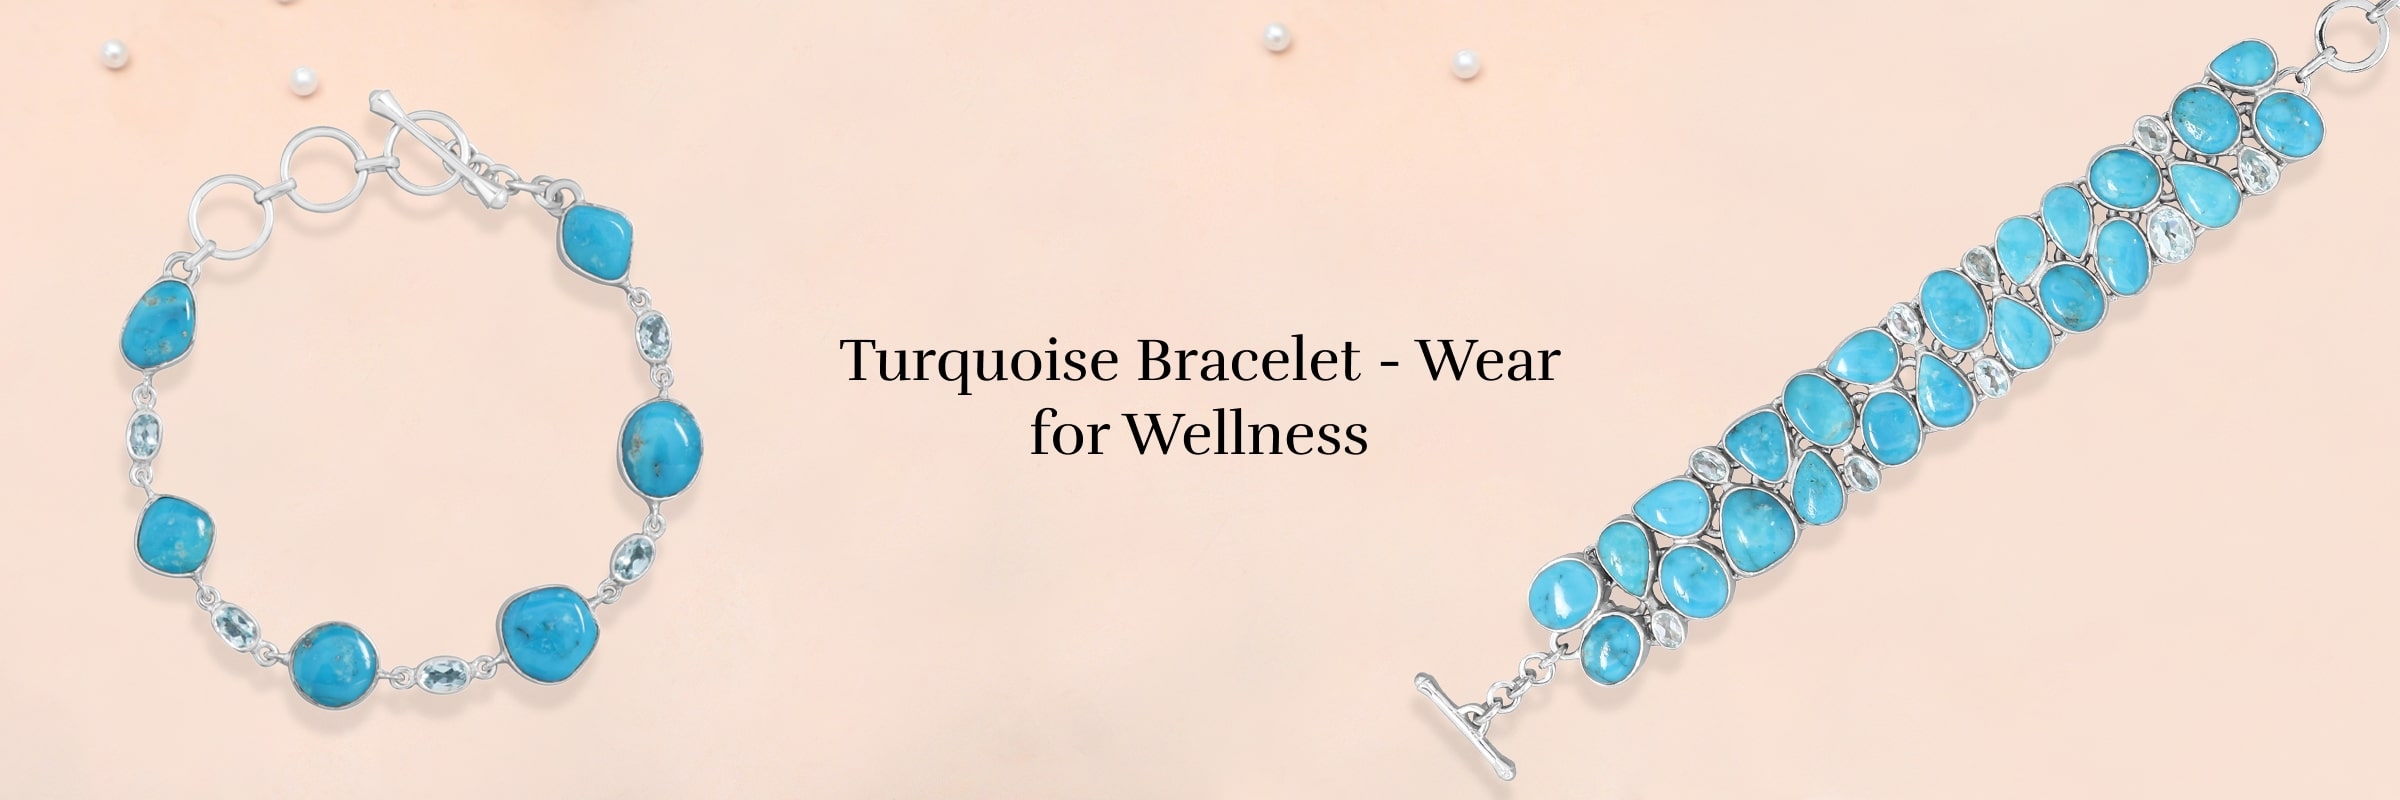 Benefits of wearing with Turquoise Bracelet